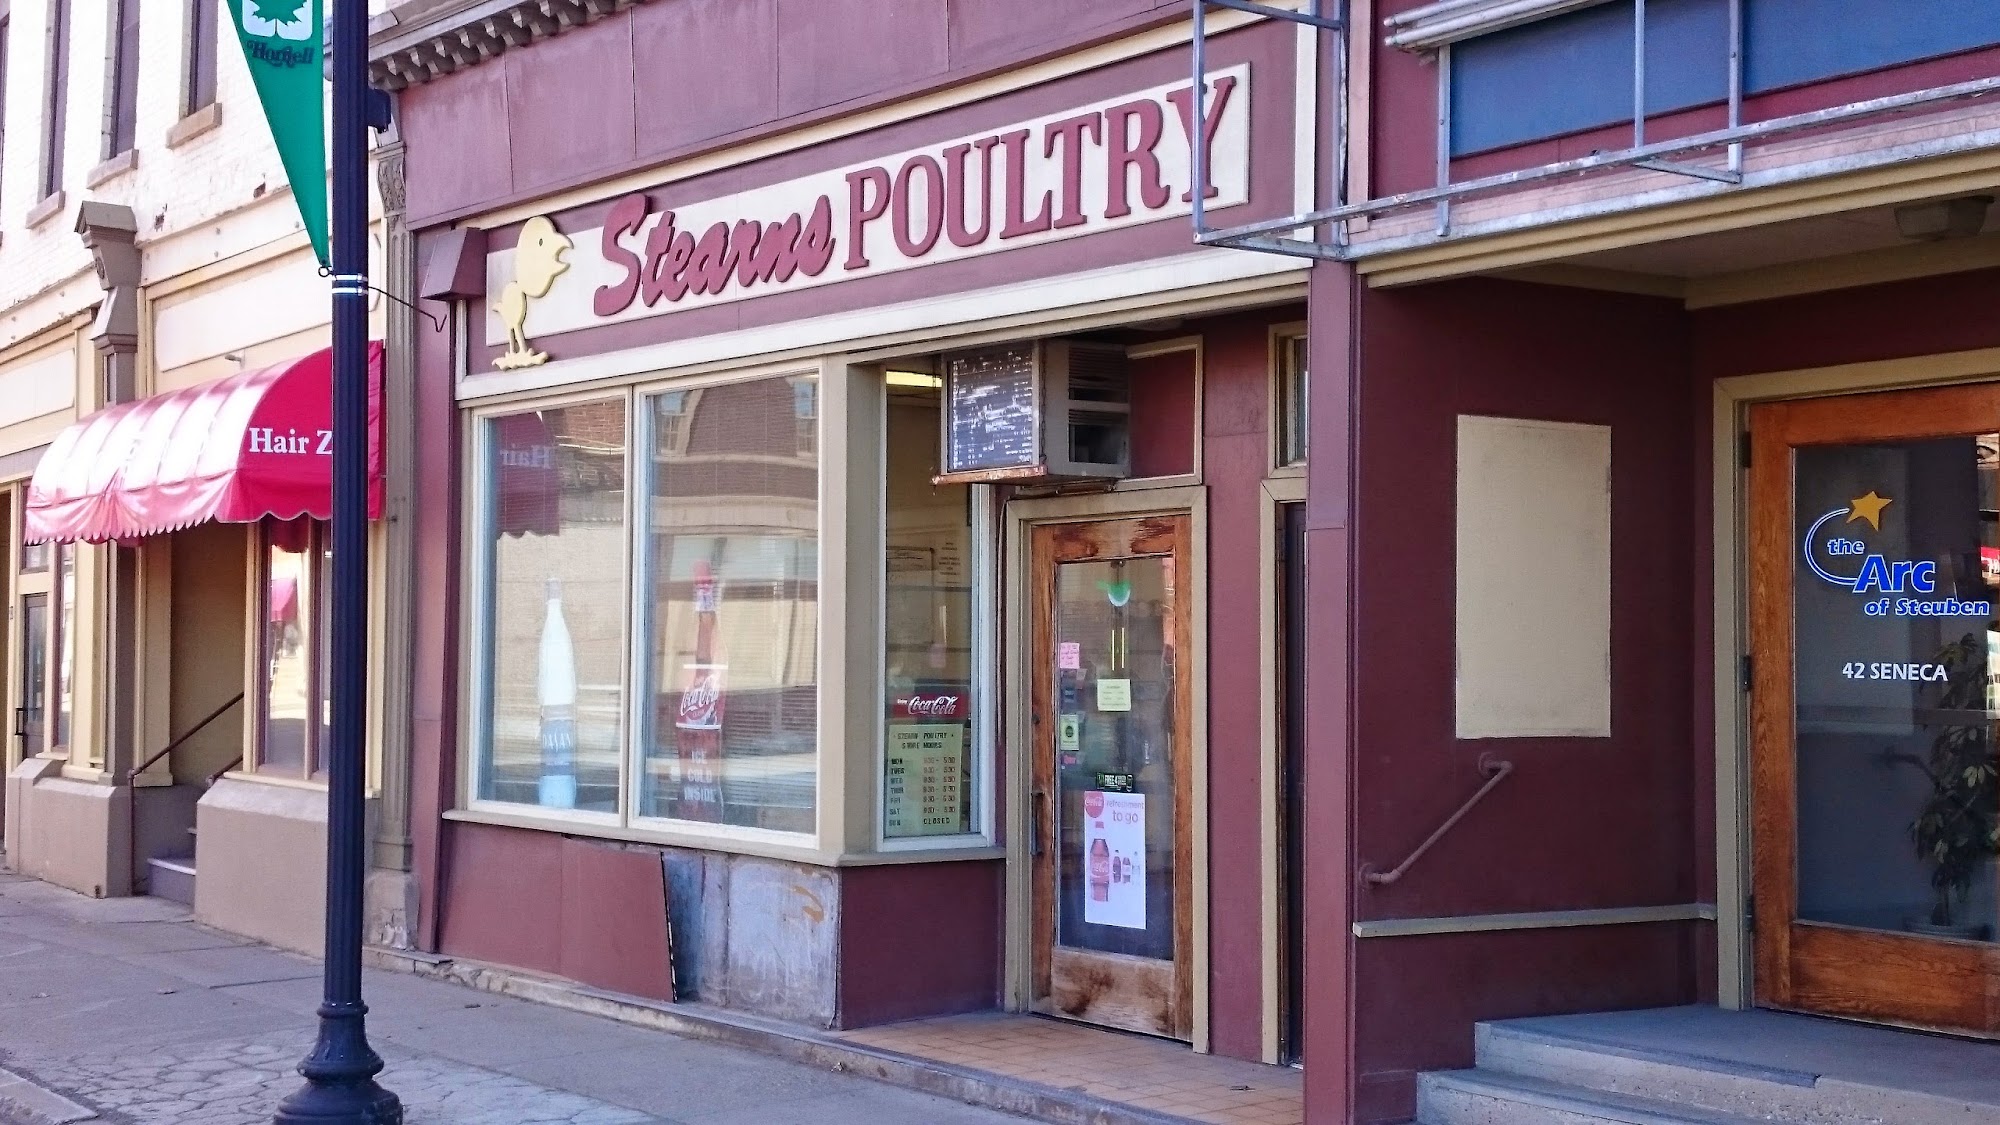 Stearns Poultry Farm Store